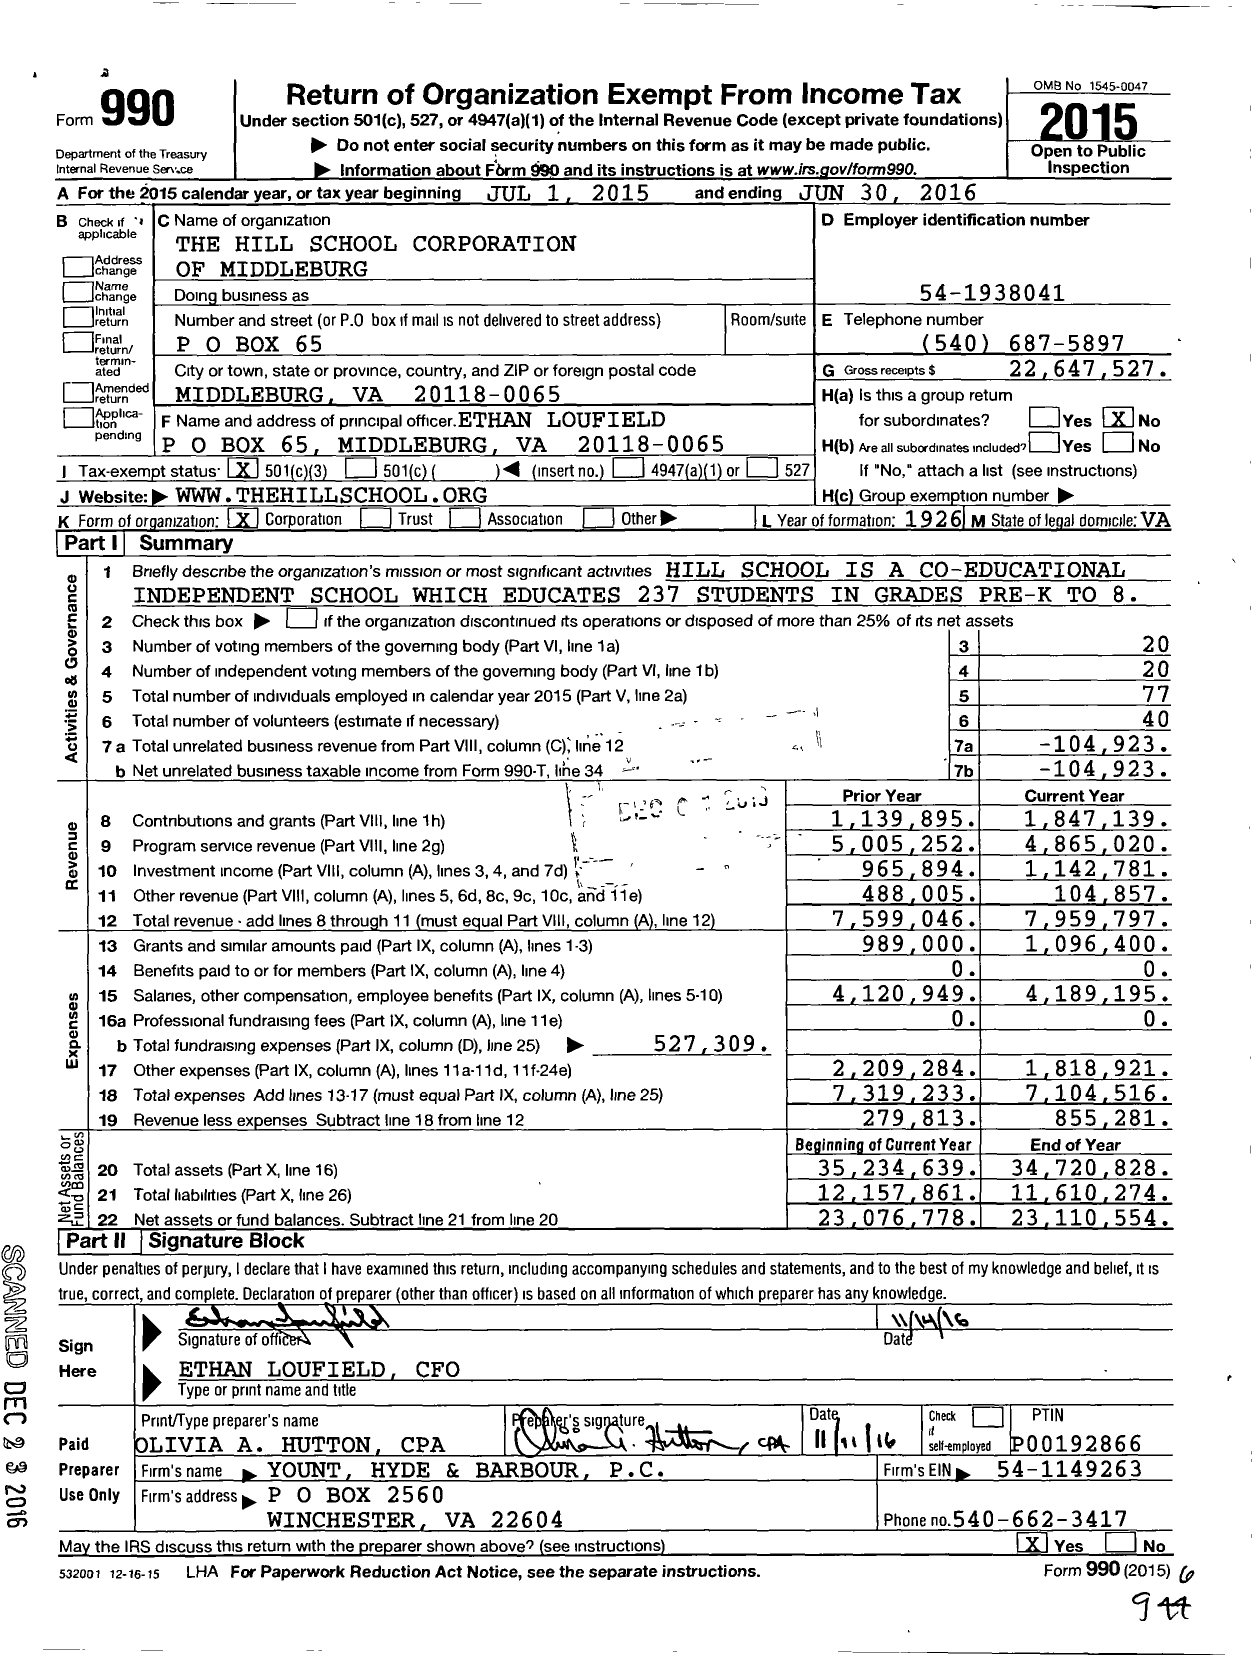 Image of first page of 2015 Form 990 for Hill School Corporation of Middleburg